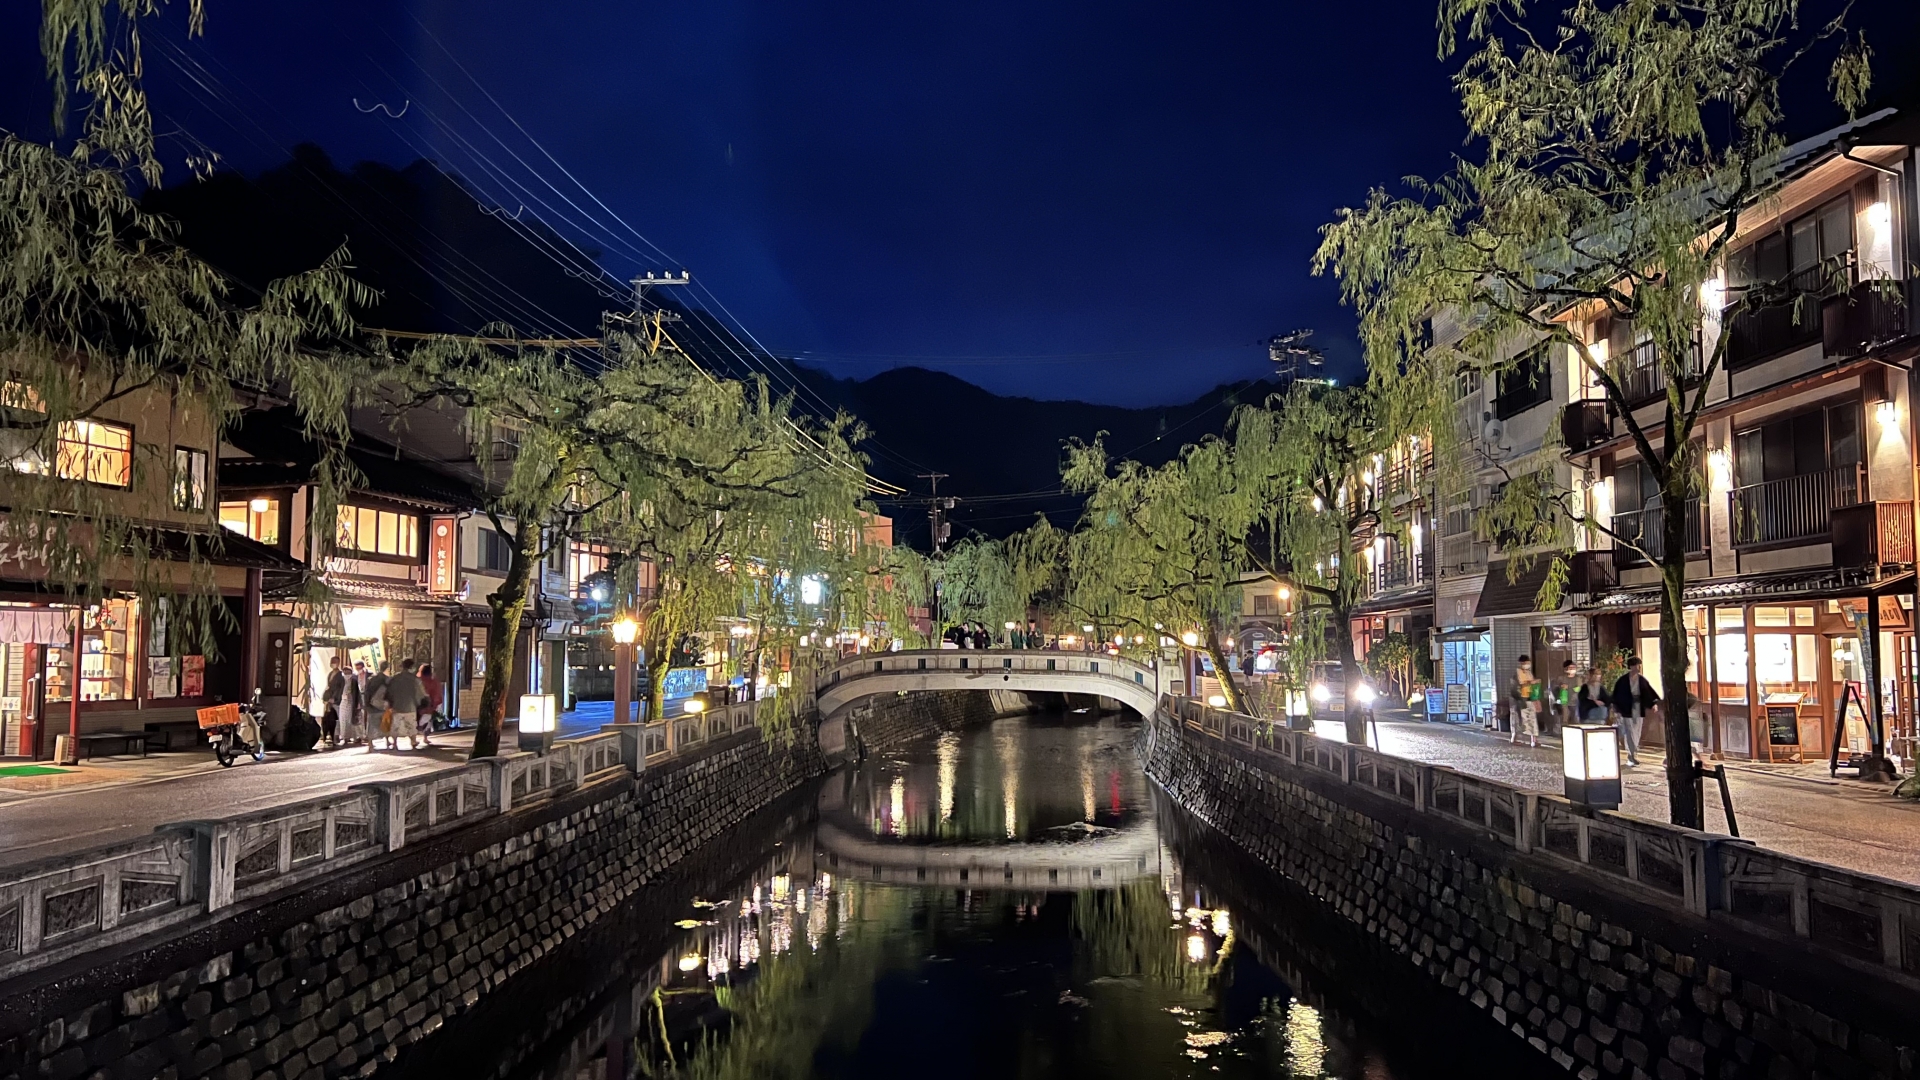 A Japanese classic onsen street the center of which there is a small river running